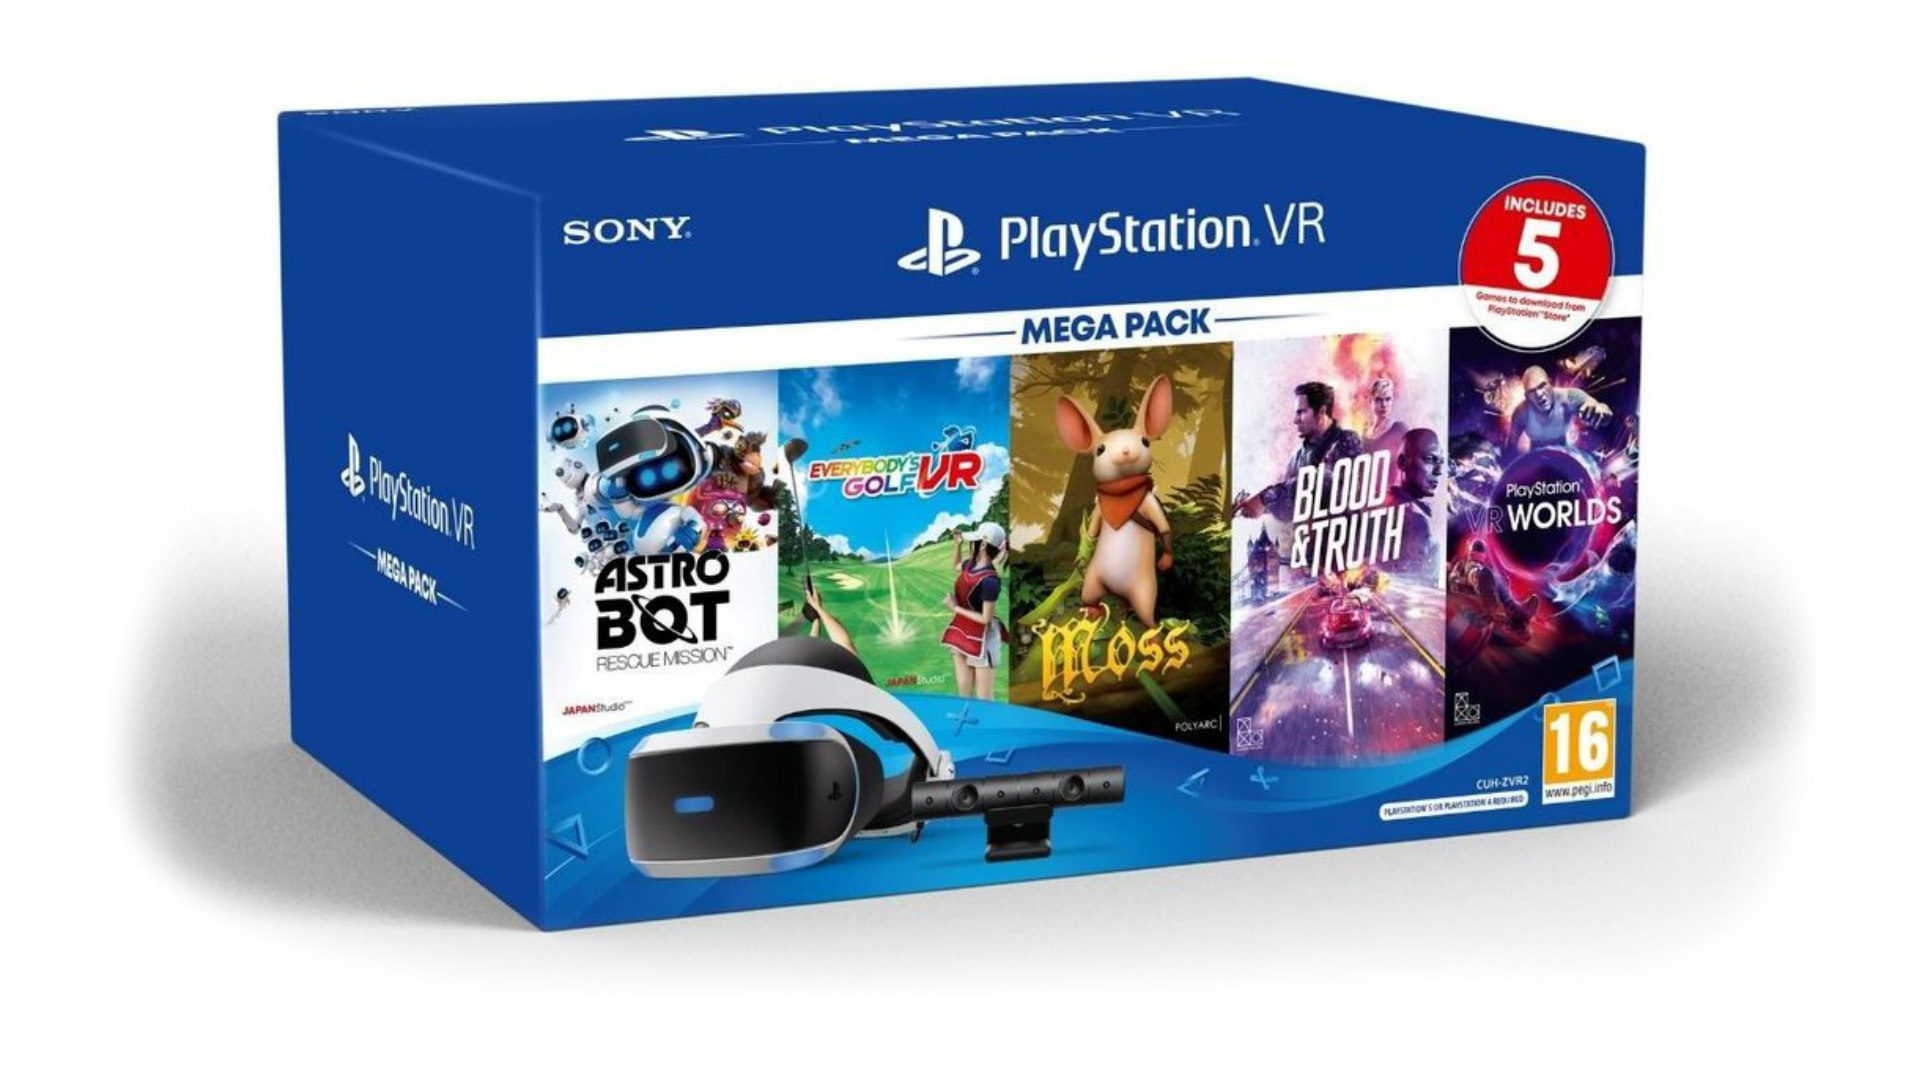 New PSVR Mega Pack for EU, Australia & New Zealand to Come with 5